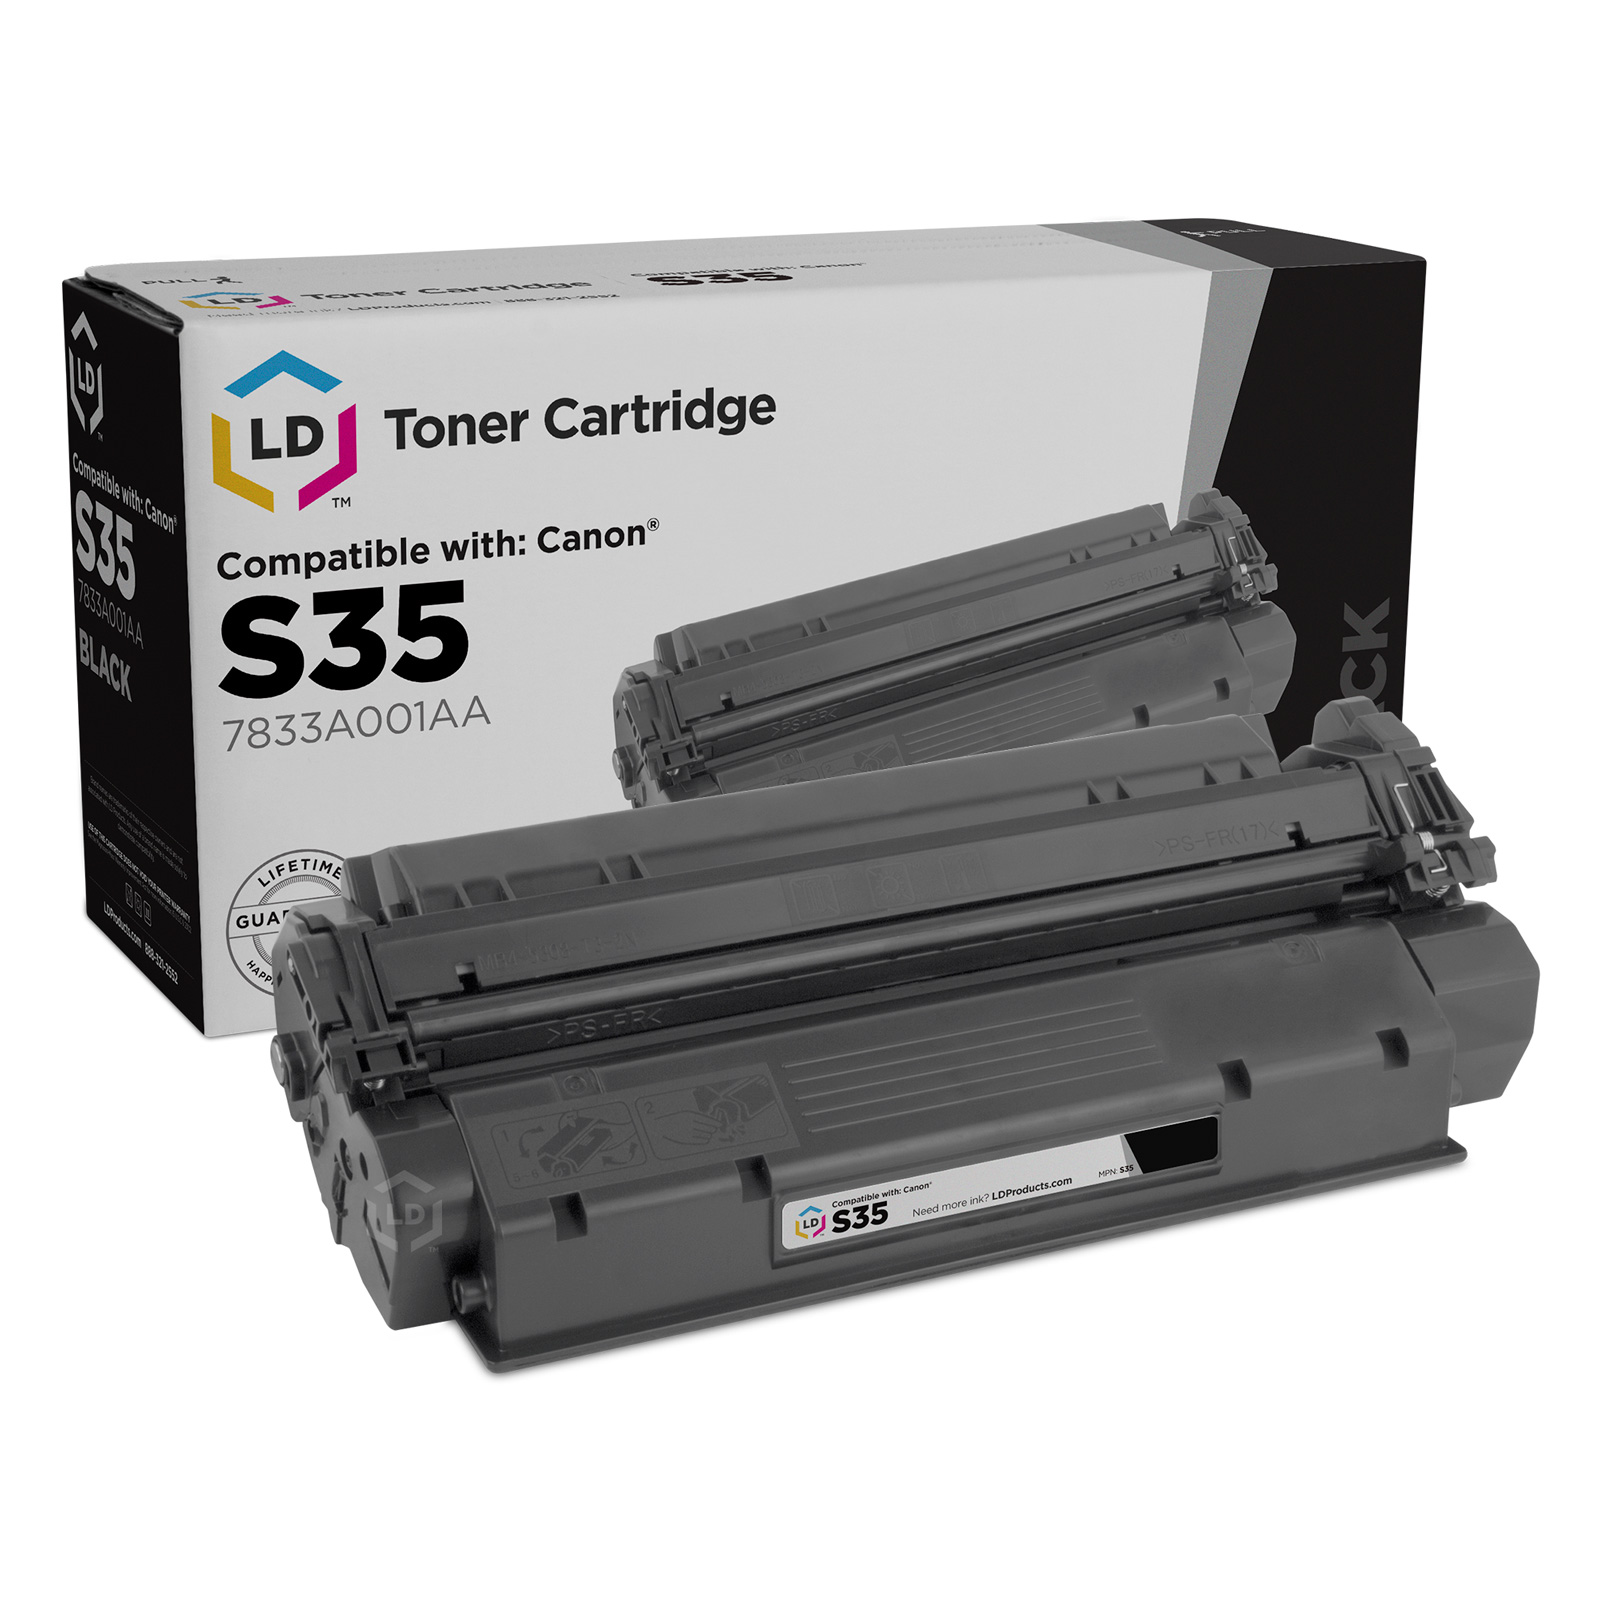 LD Remanufactured Replacement for Canon S35 7833A001AA Black Toner Cartridge for ICD-340, D320, D340, D383, L170 S35WAL-2 - image 1 of 7